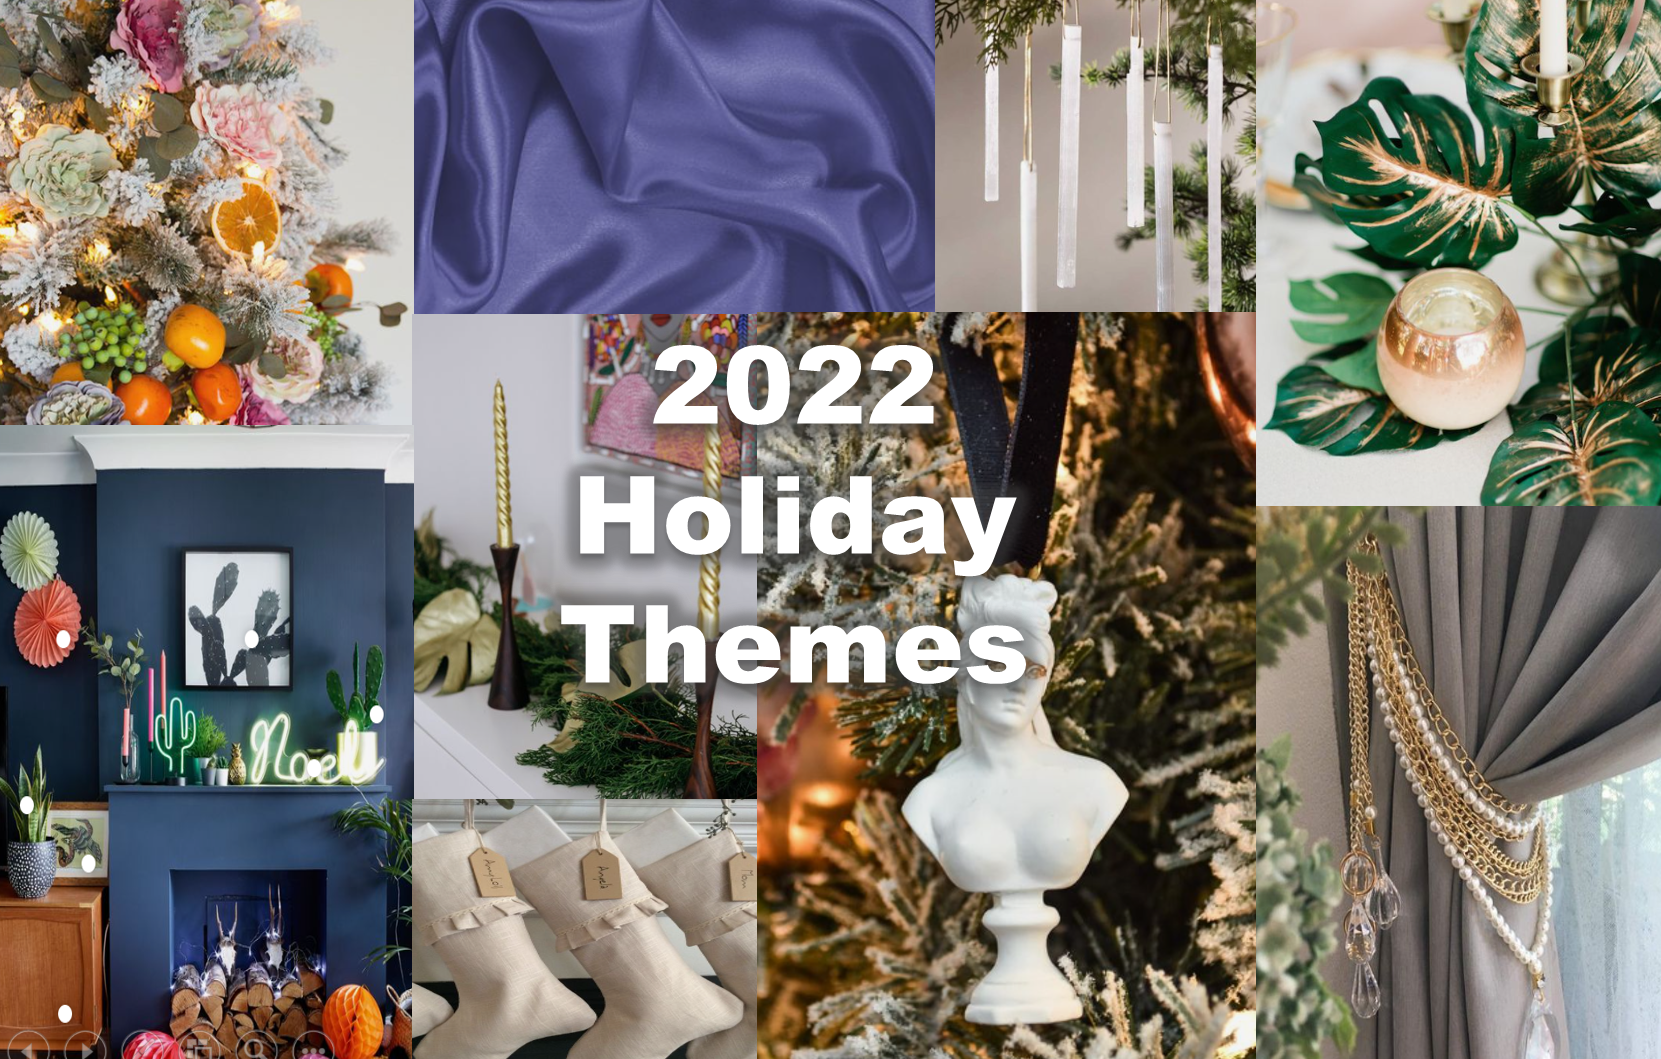 2022 Holiday Themes to Make Your Holiday Party Unforgettable